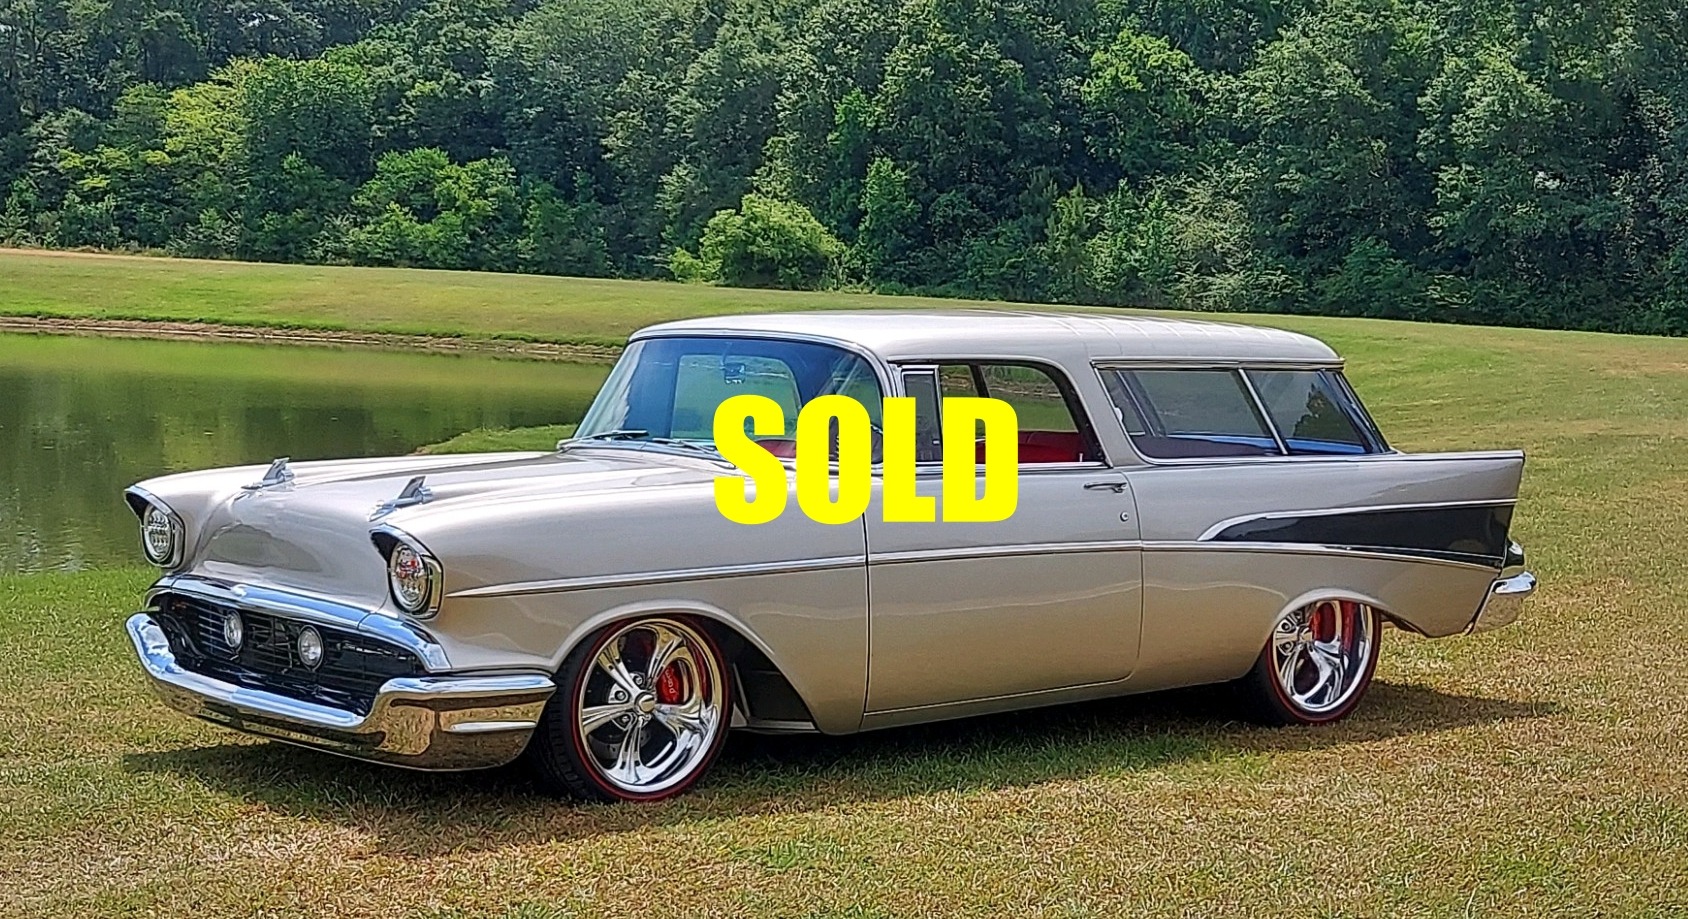 Used 1957 Chevrolet Nomad  209 , For Sale $210000, Call Us: (704) 996-3735